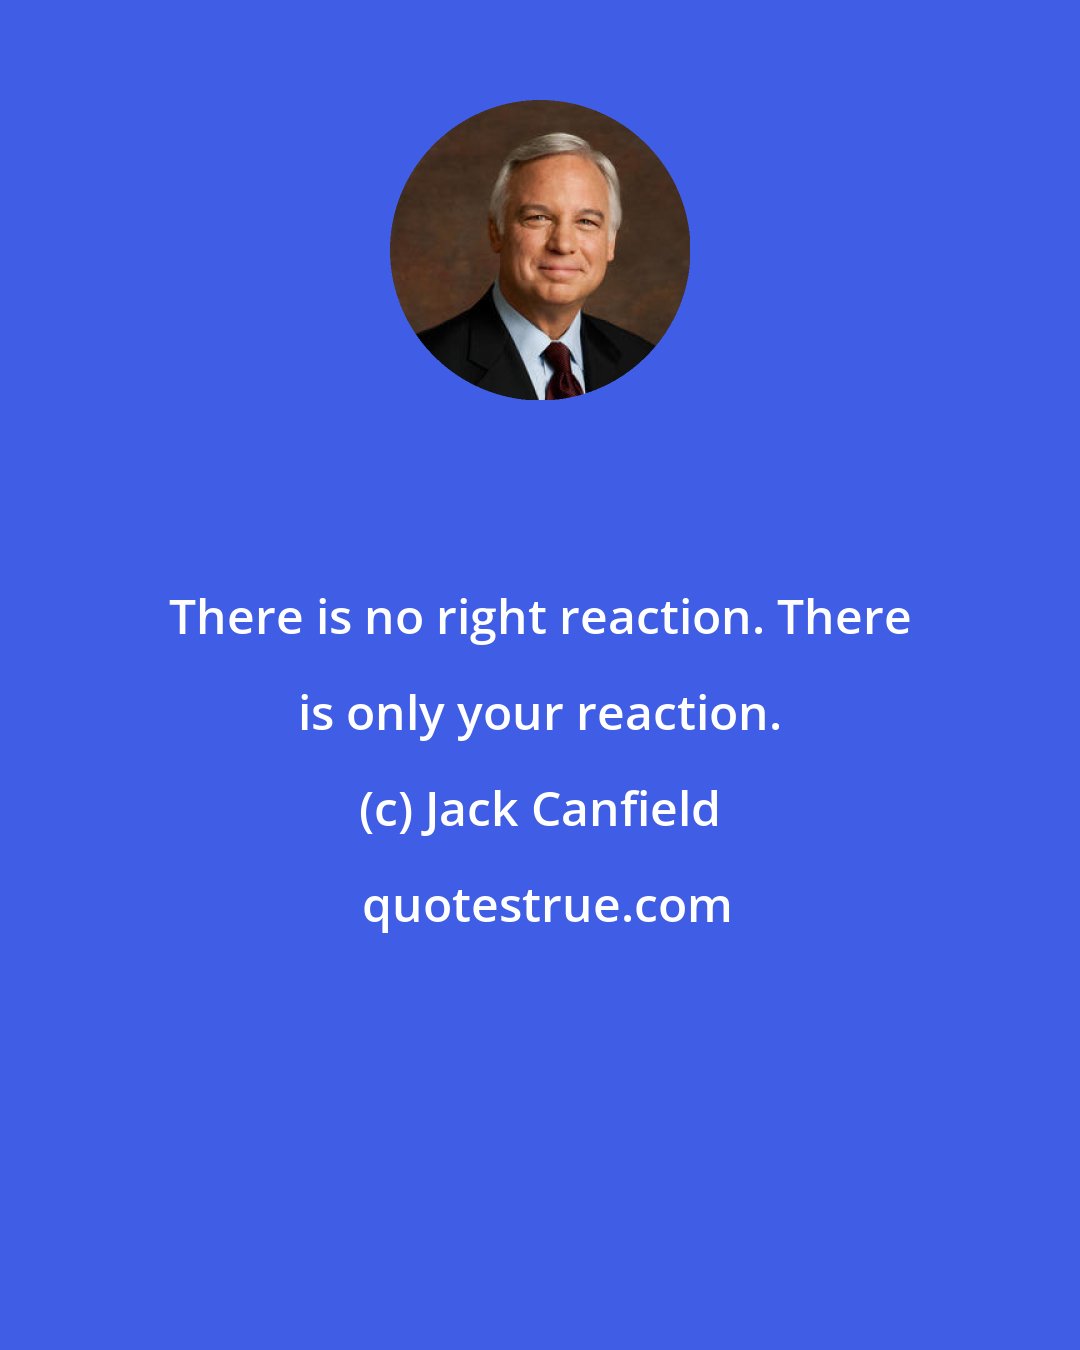 Jack Canfield: There is no right reaction. There is only your reaction.